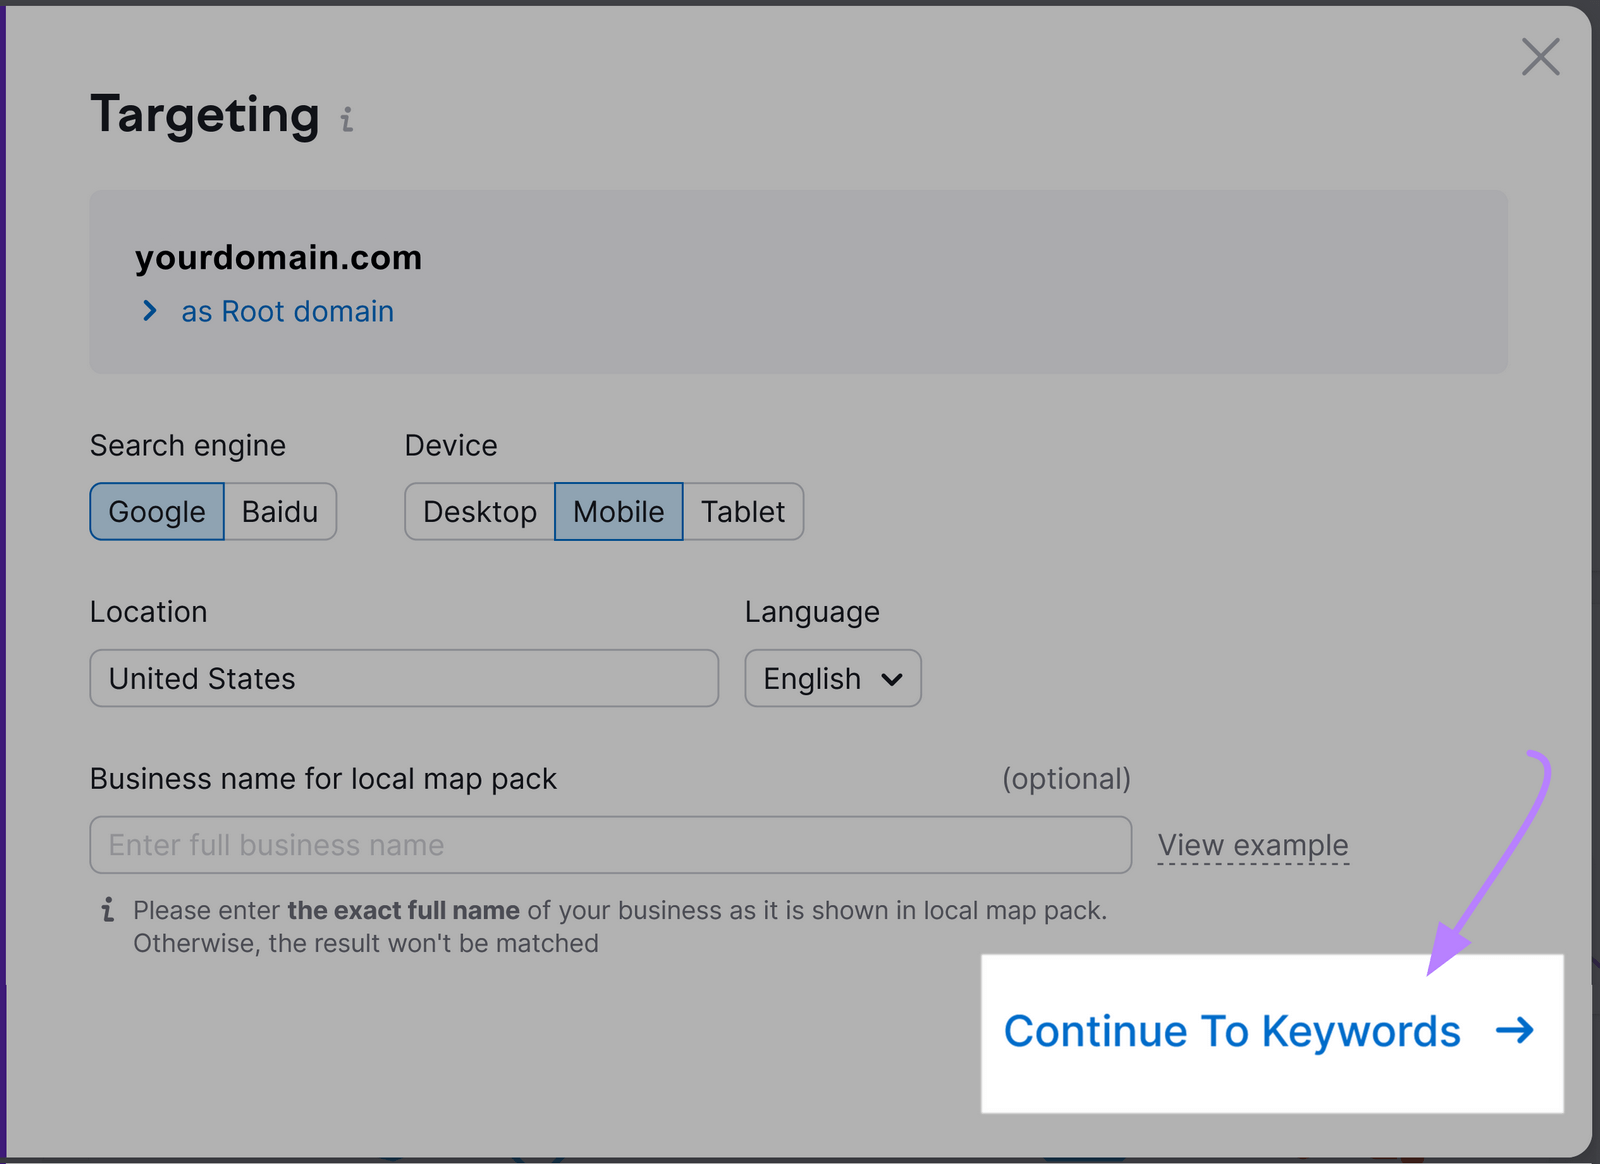 “Continue To Keywords” button highlighted